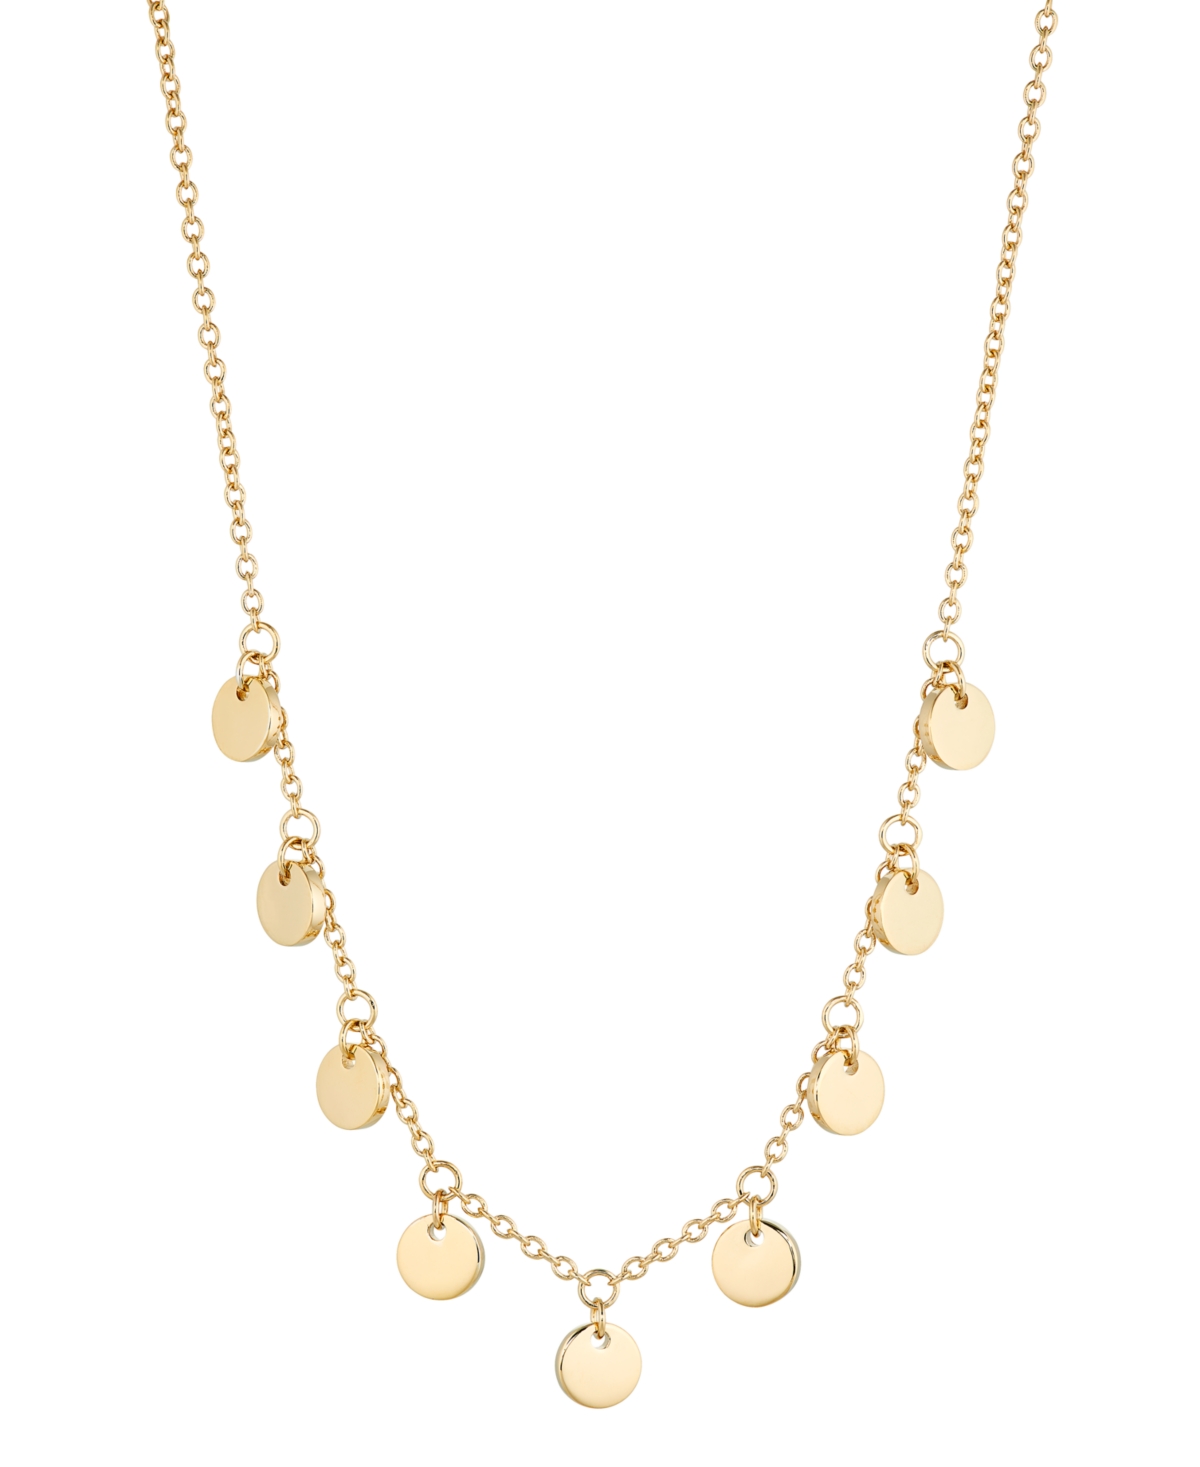 Gold Coin Shaky Necklace - Gold